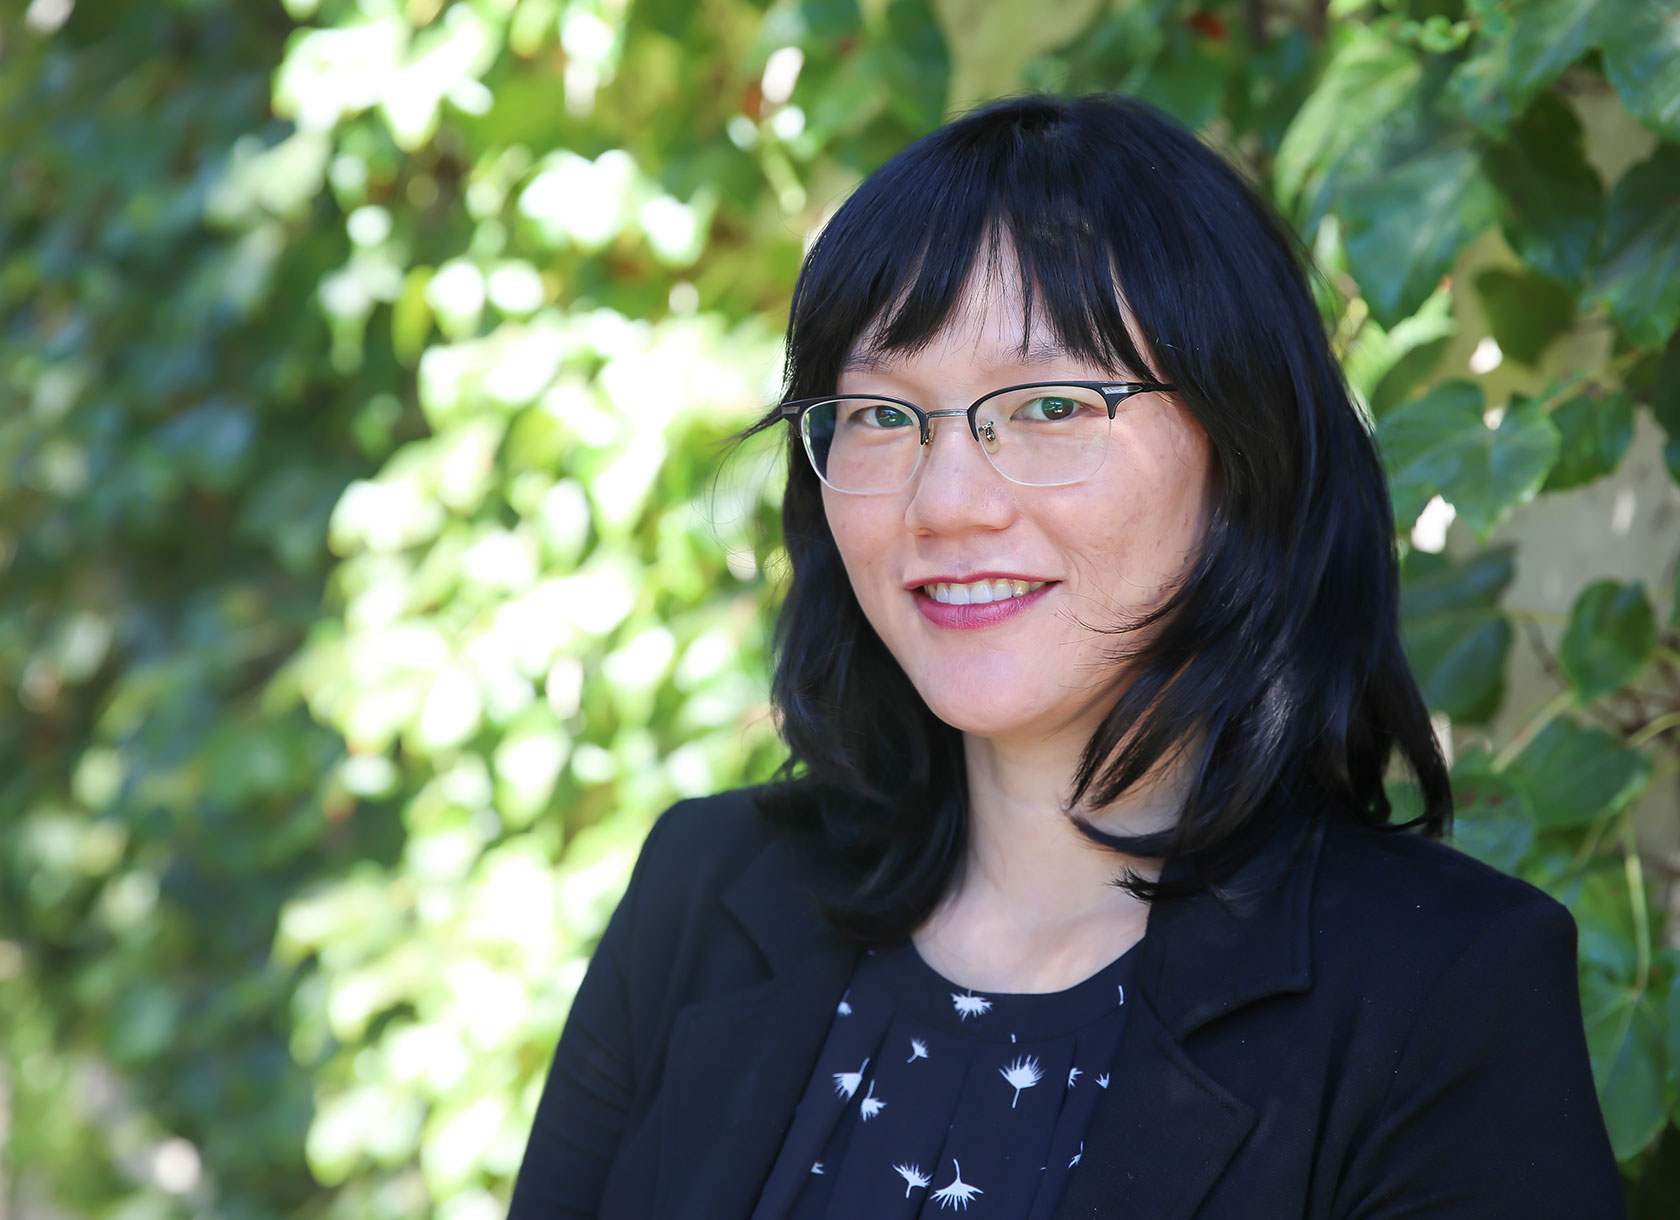 Close-up portrait of Wendy Cheng, associate professor of American studies at Scripps College